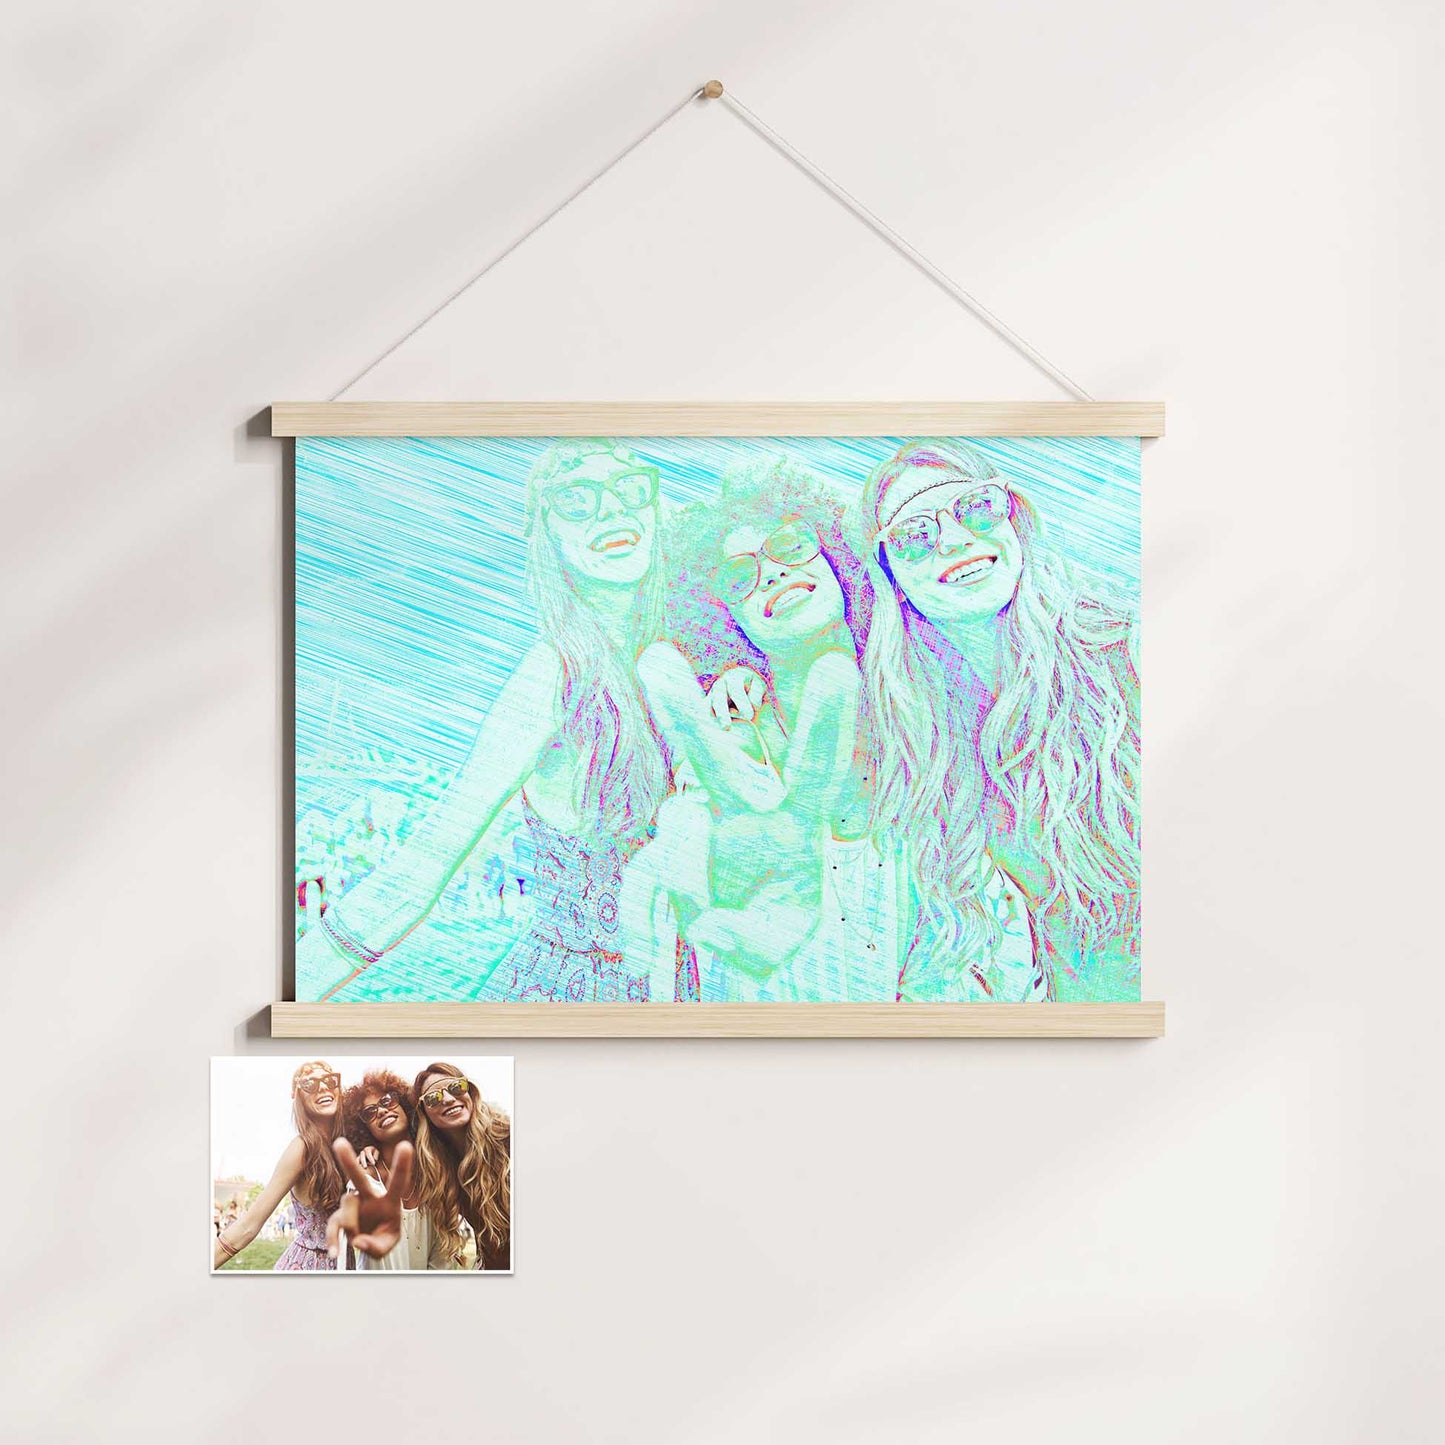 The Personalised Blue Drawing Poster Hanger showcases your cherished memories with a unique twist. With a drawing created from your photo, enhanced with a pencil effect, it adds a touch of artistic flair, vibrant blue and vivid colors